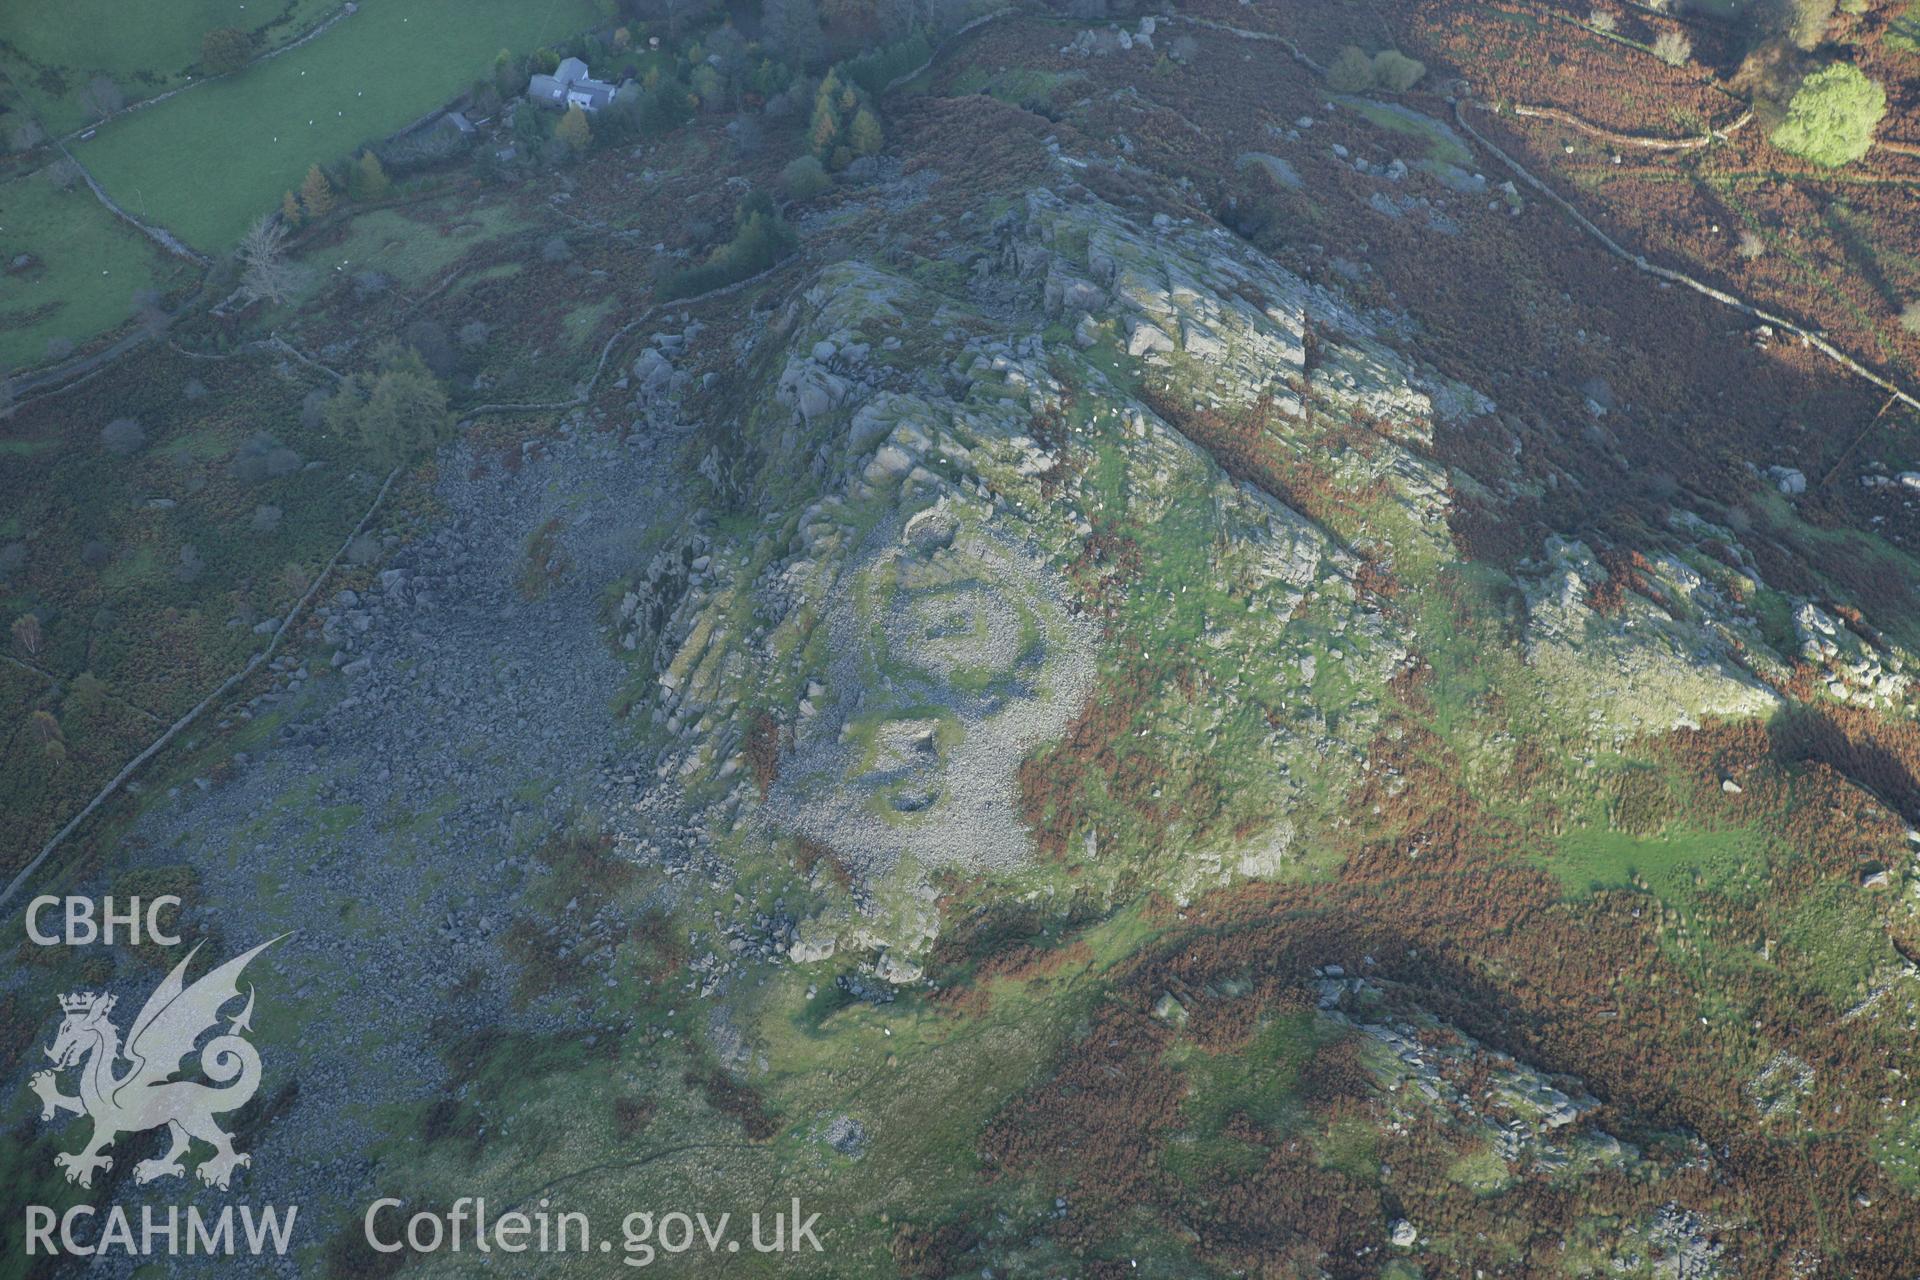 RCAHMW colour oblique photograph of Castell Carndochan. Taken by Toby Driver on 30/10/2007.